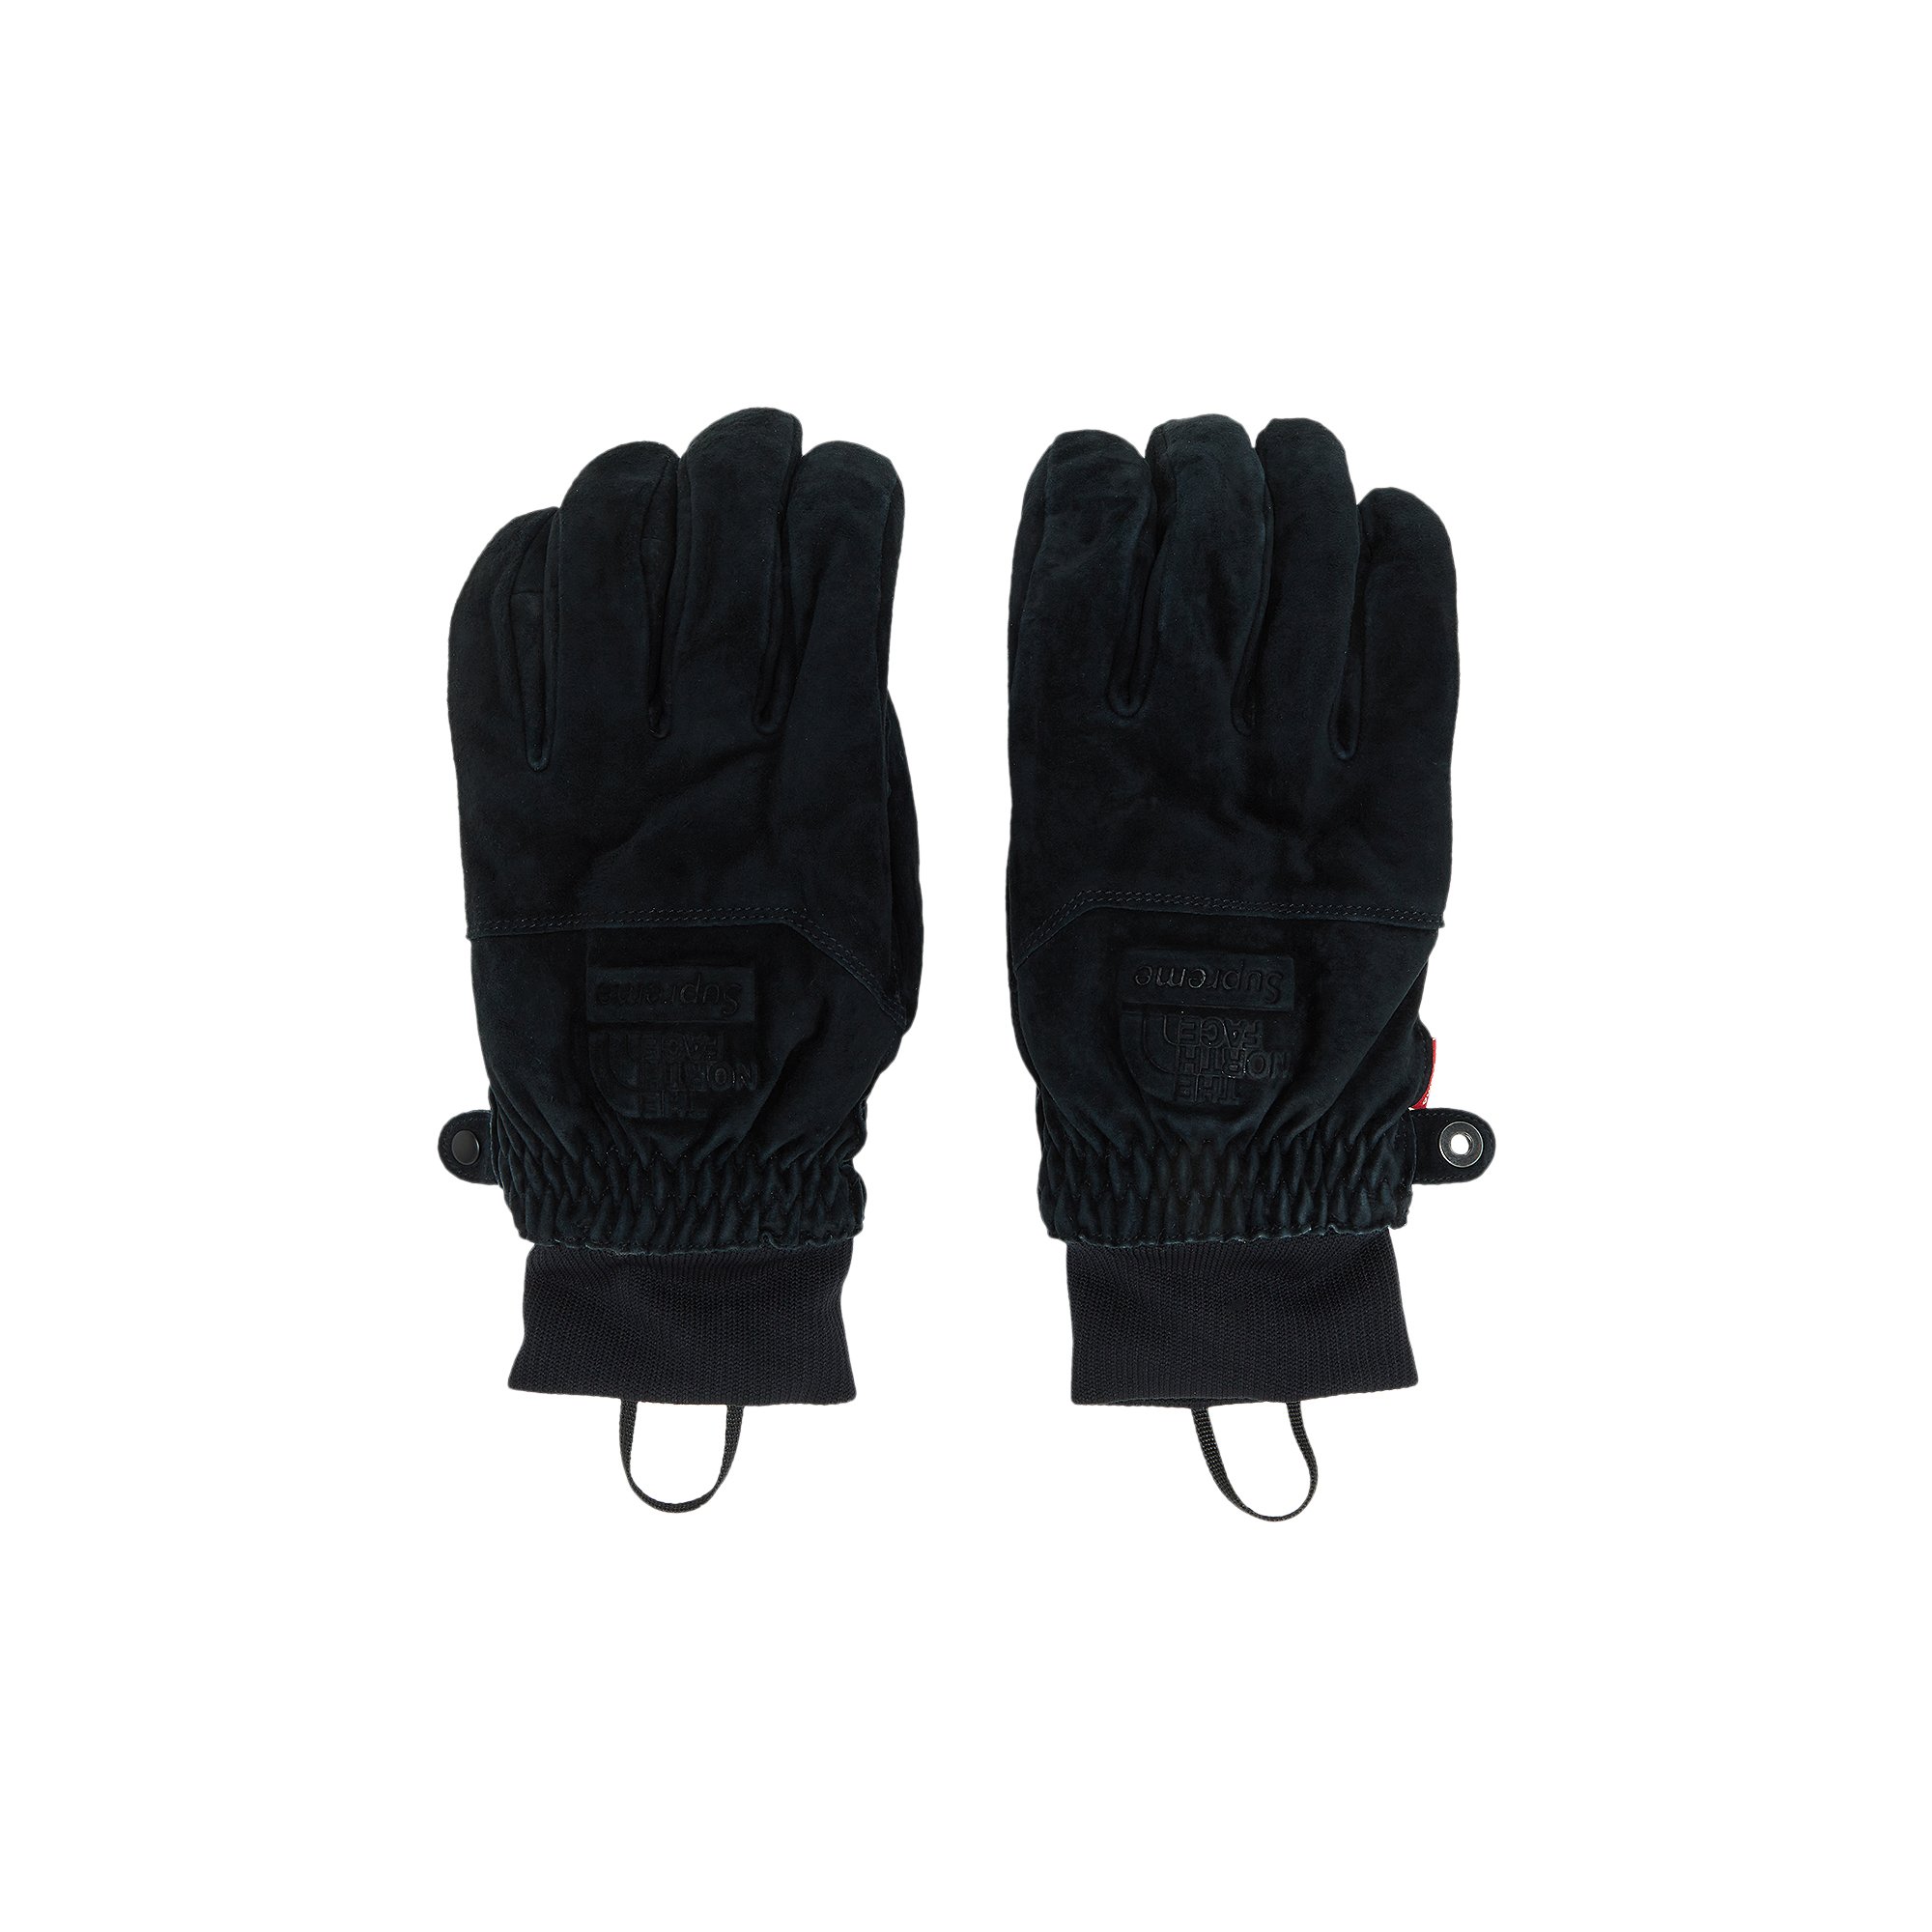 Buy Supreme x The North Face Suede Glove 'Black' - FW23A1 BLACK | GOAT